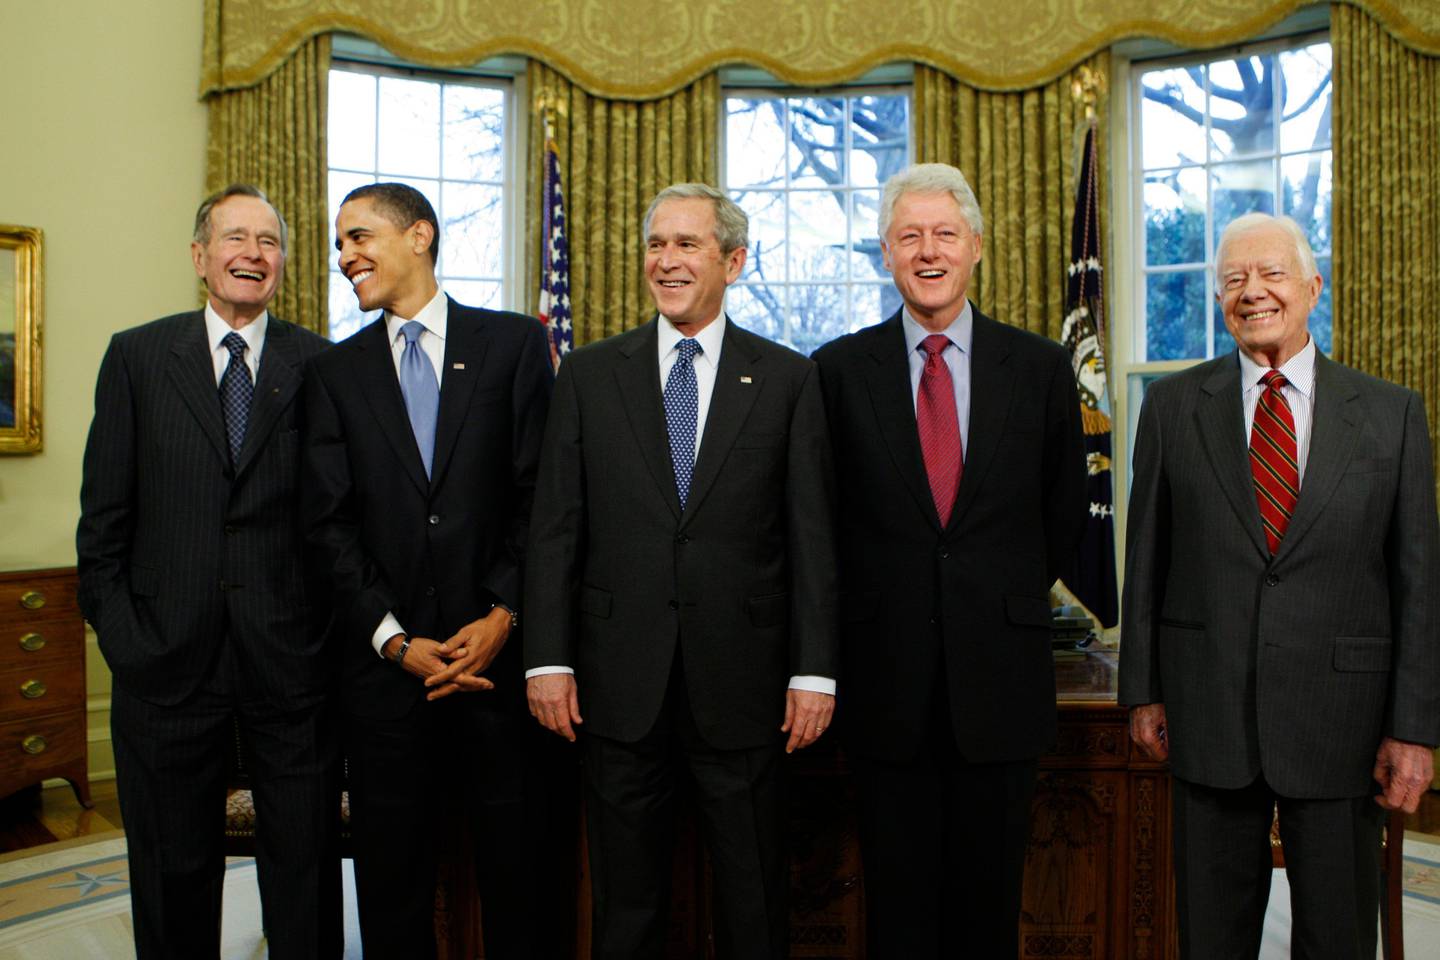 FILE - In this Wednesday, Jan. 7, 2009 file photo, President-elect Barack Obama is welcomed by President George W. Bush for a meeting at the White House in Washington, with former presidents, from left, George H.W. Bush, Bill Clinton and Jimmy Carter. On Friday, May 15, 2020, The Associated Press reported on stories circulating online incorrectly asserting that Obama is the first president to speak out against his successor. Several former presidents have made comments criticizing the policies of their successors, including George W. Bush, Bill Clinton, Jimmy Carter _ even Theodore Roosevelt. (AP Photo/J. Scott Applewhite)